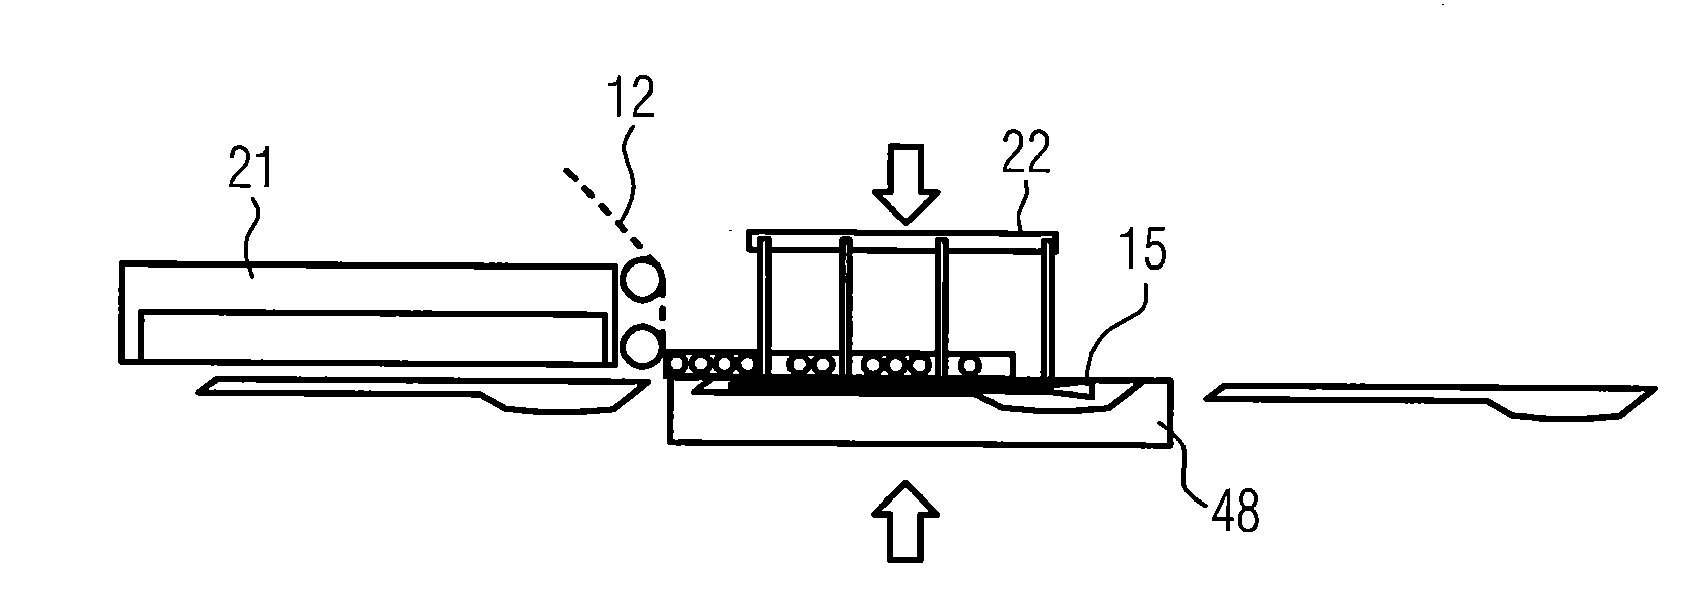 Thermoform packaging machine and method